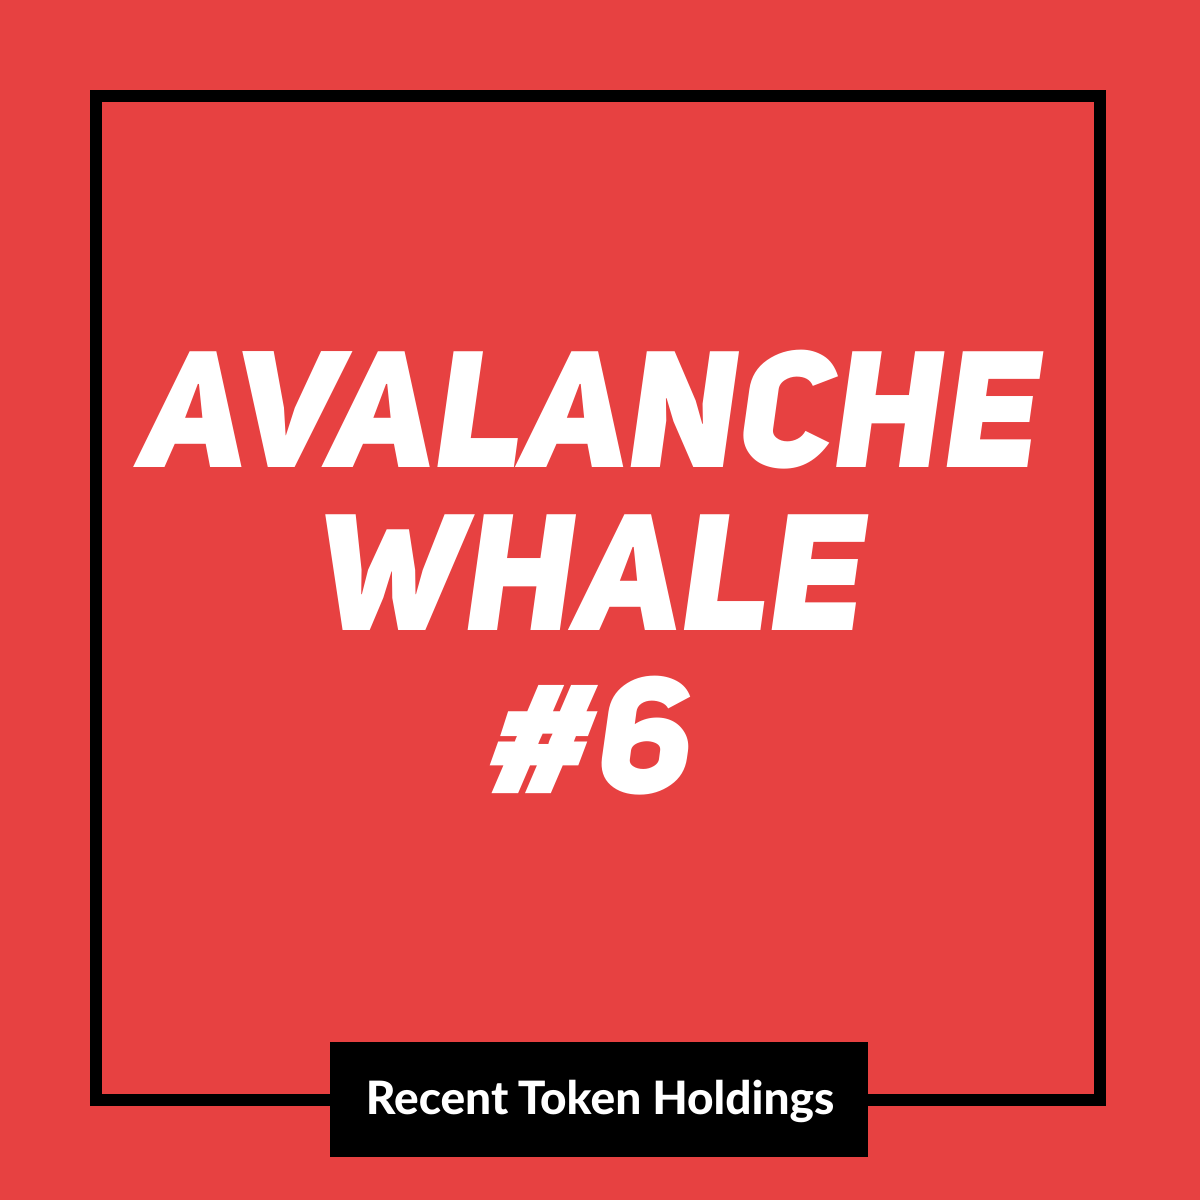 Avalanche Whale #6